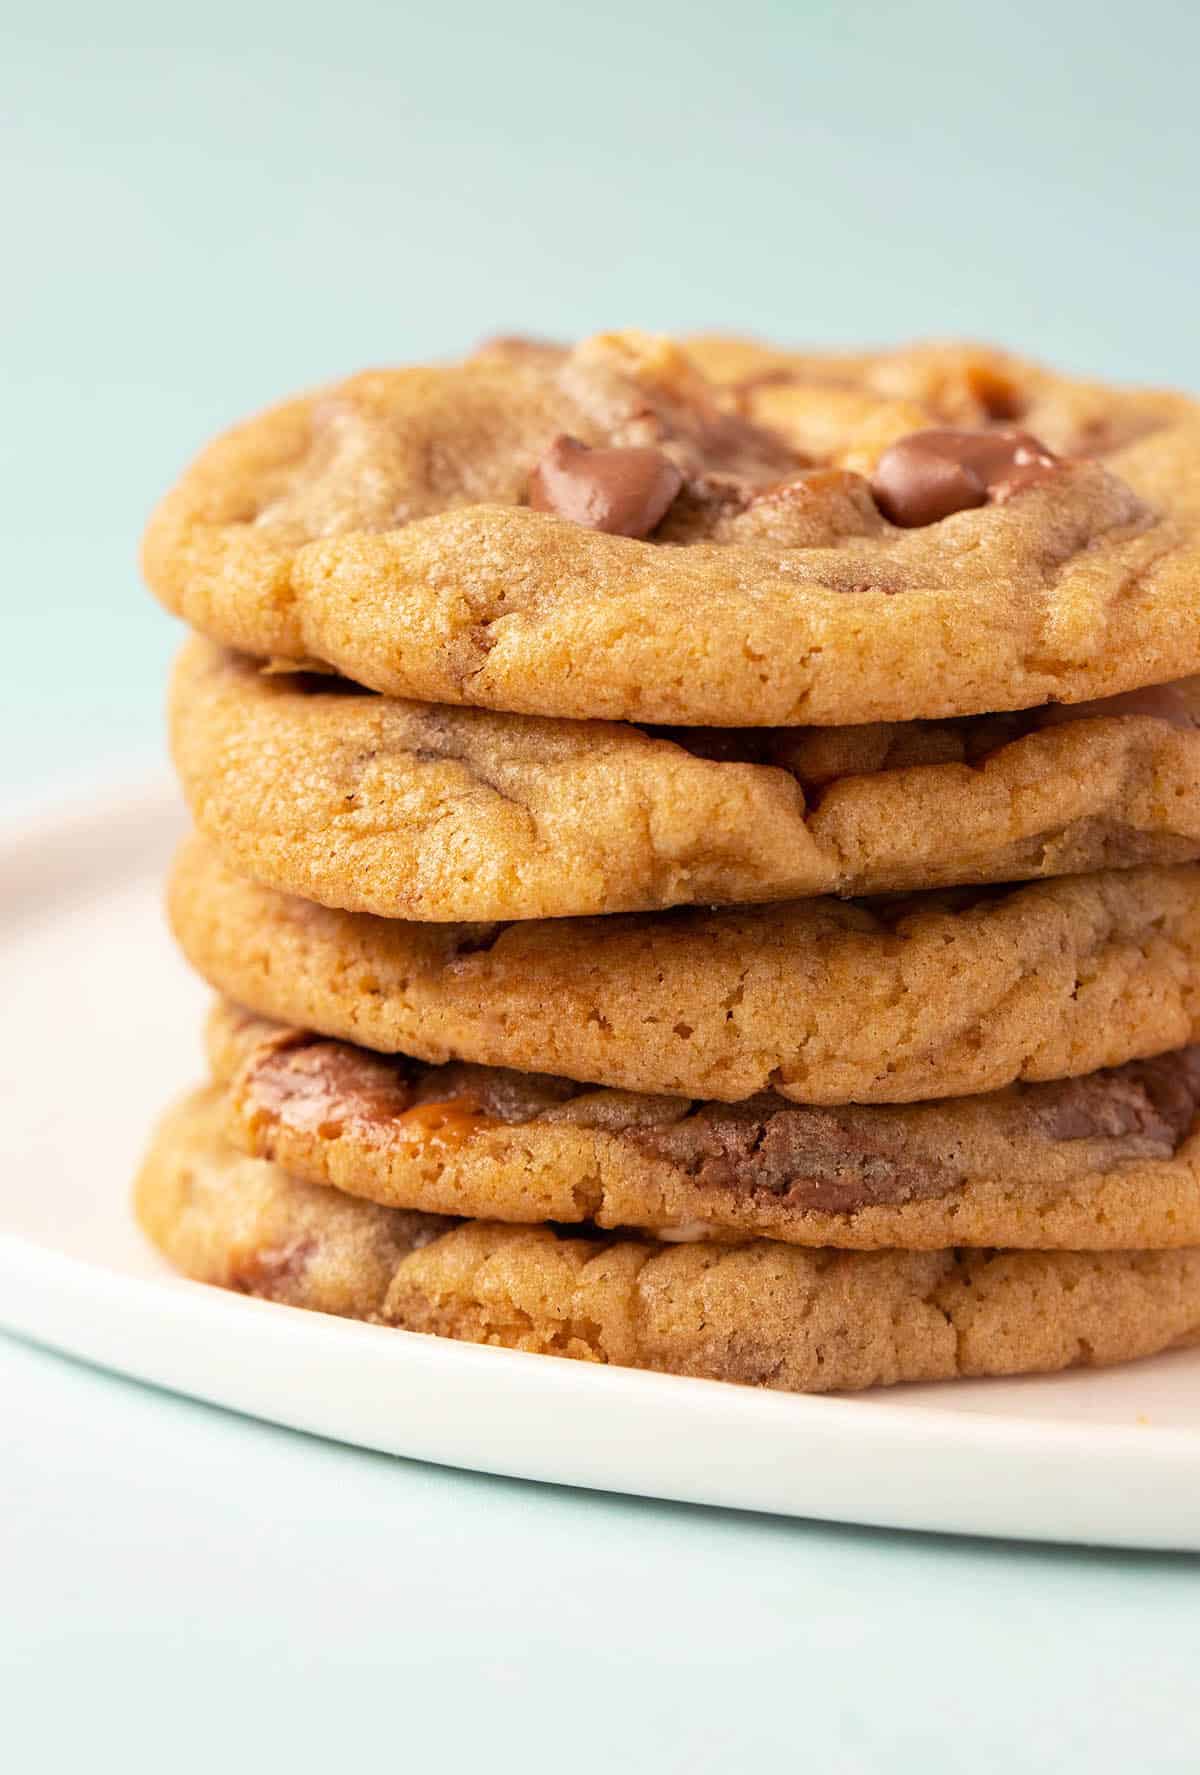 A stack of crispy Snickers Cookies on a white plate.